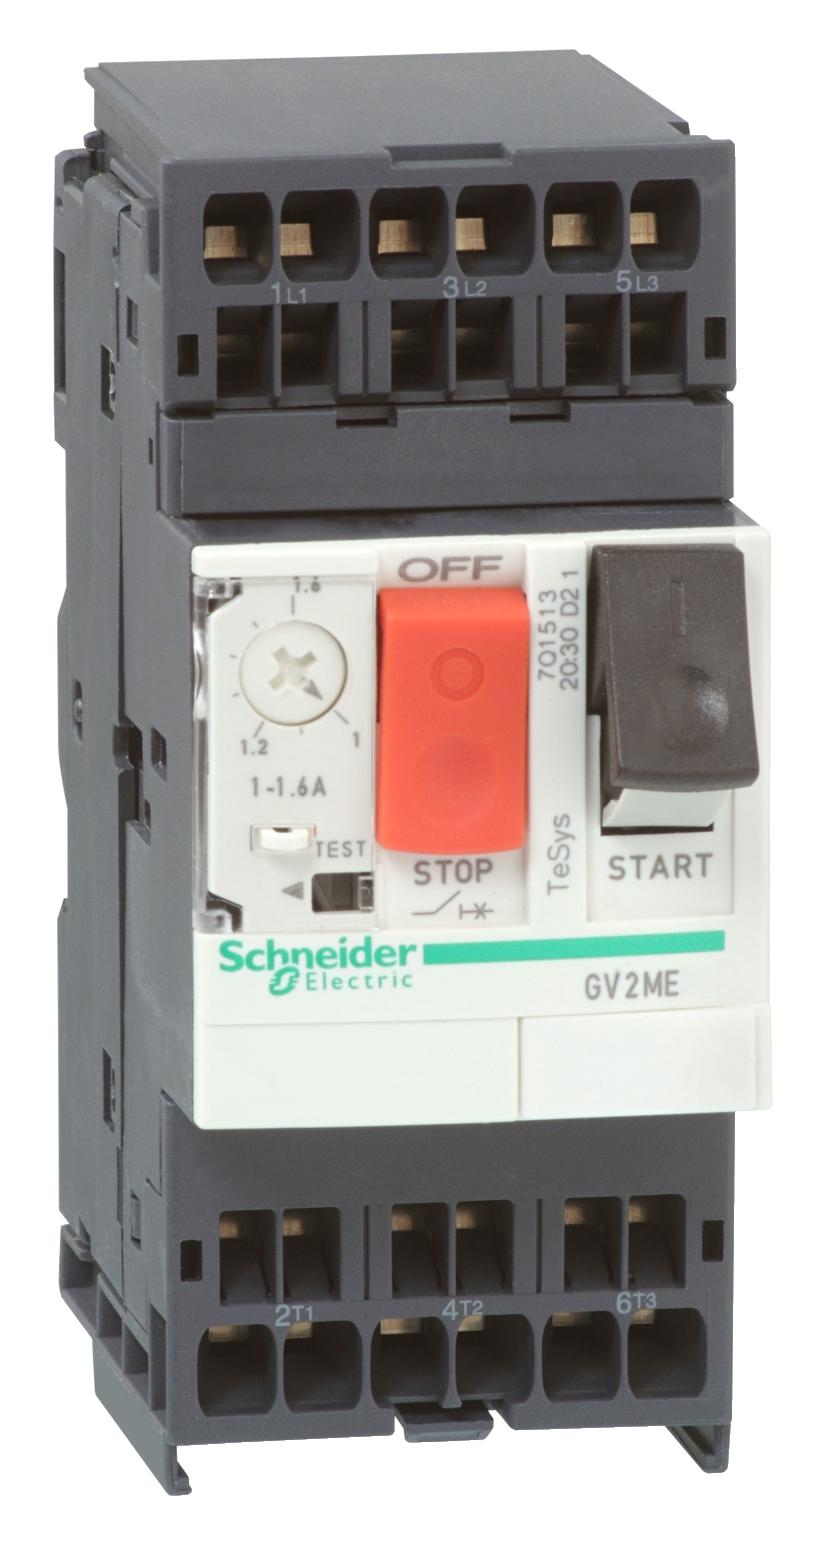 GV2ME203 THERMAL MAGNETIC CIRCUIT BREAKER SCHNEIDER ELECTRIC